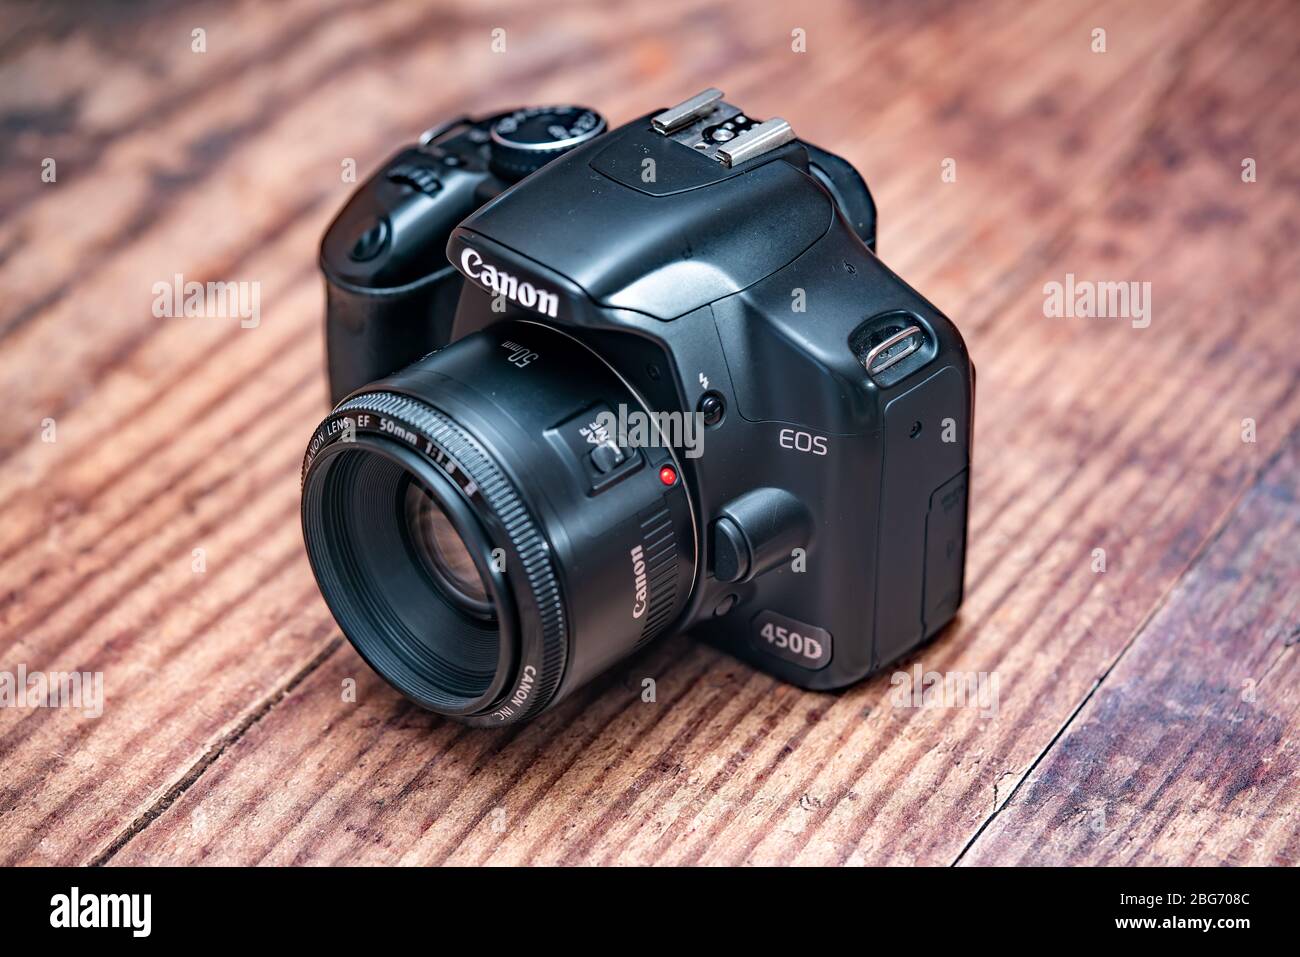 Norwich, Norfolk, UK – April 19 2020. Top down view of classic Canon EOS 450d dslr camera and 50mm f1.8 prime lens on a wooden table Stock Photo